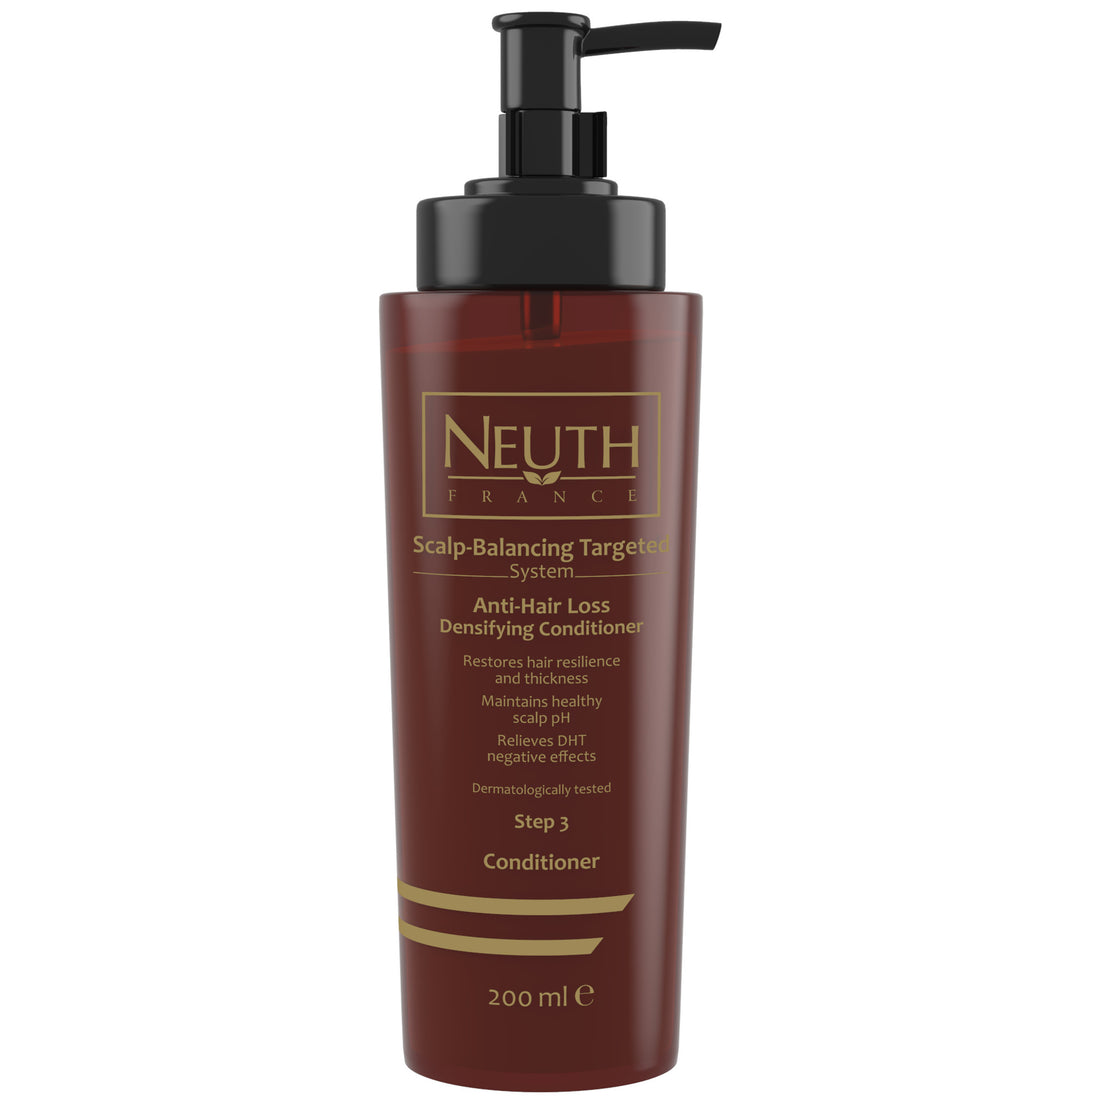 Neuth Anti-hair loss Scalp-Balancing Targeted System Densifying Conditioner 200 ml